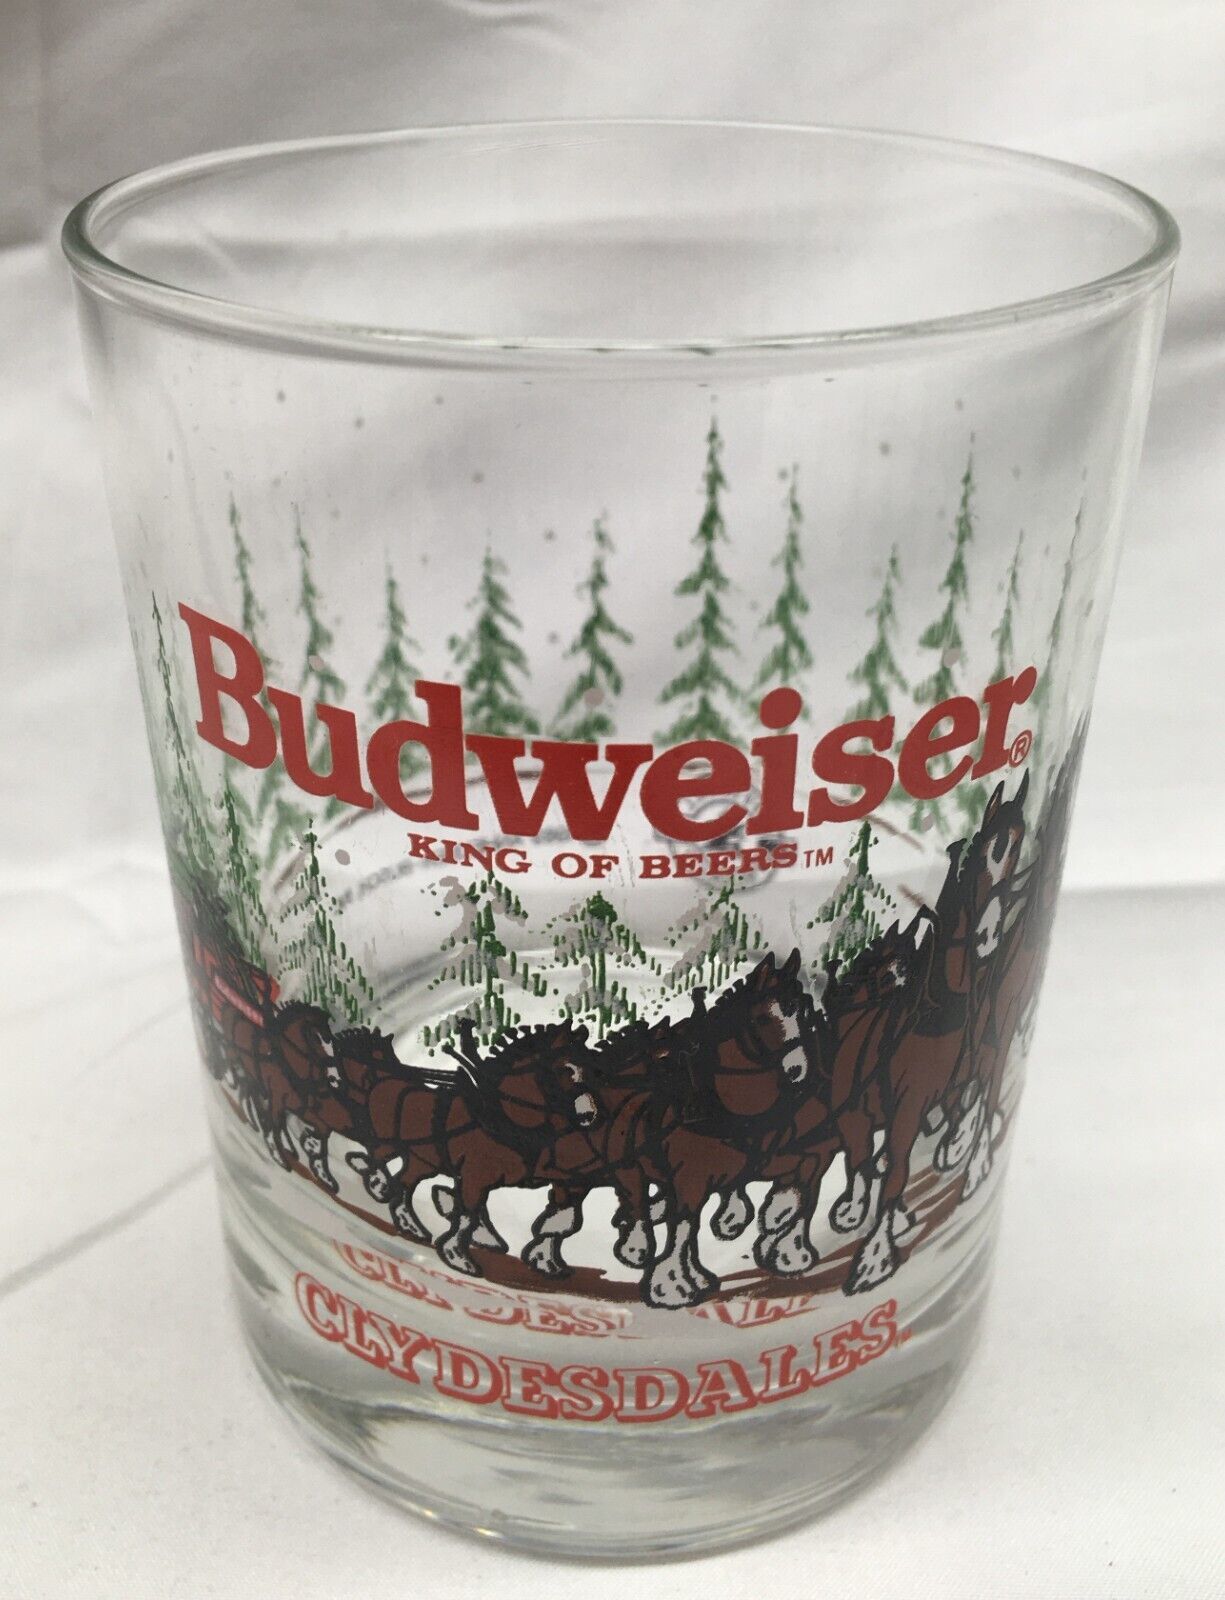 VINTAGE 1989 BUDWEISER King of Beers CLYDESDALES 4" Collector's GLASS CUP - $19.80